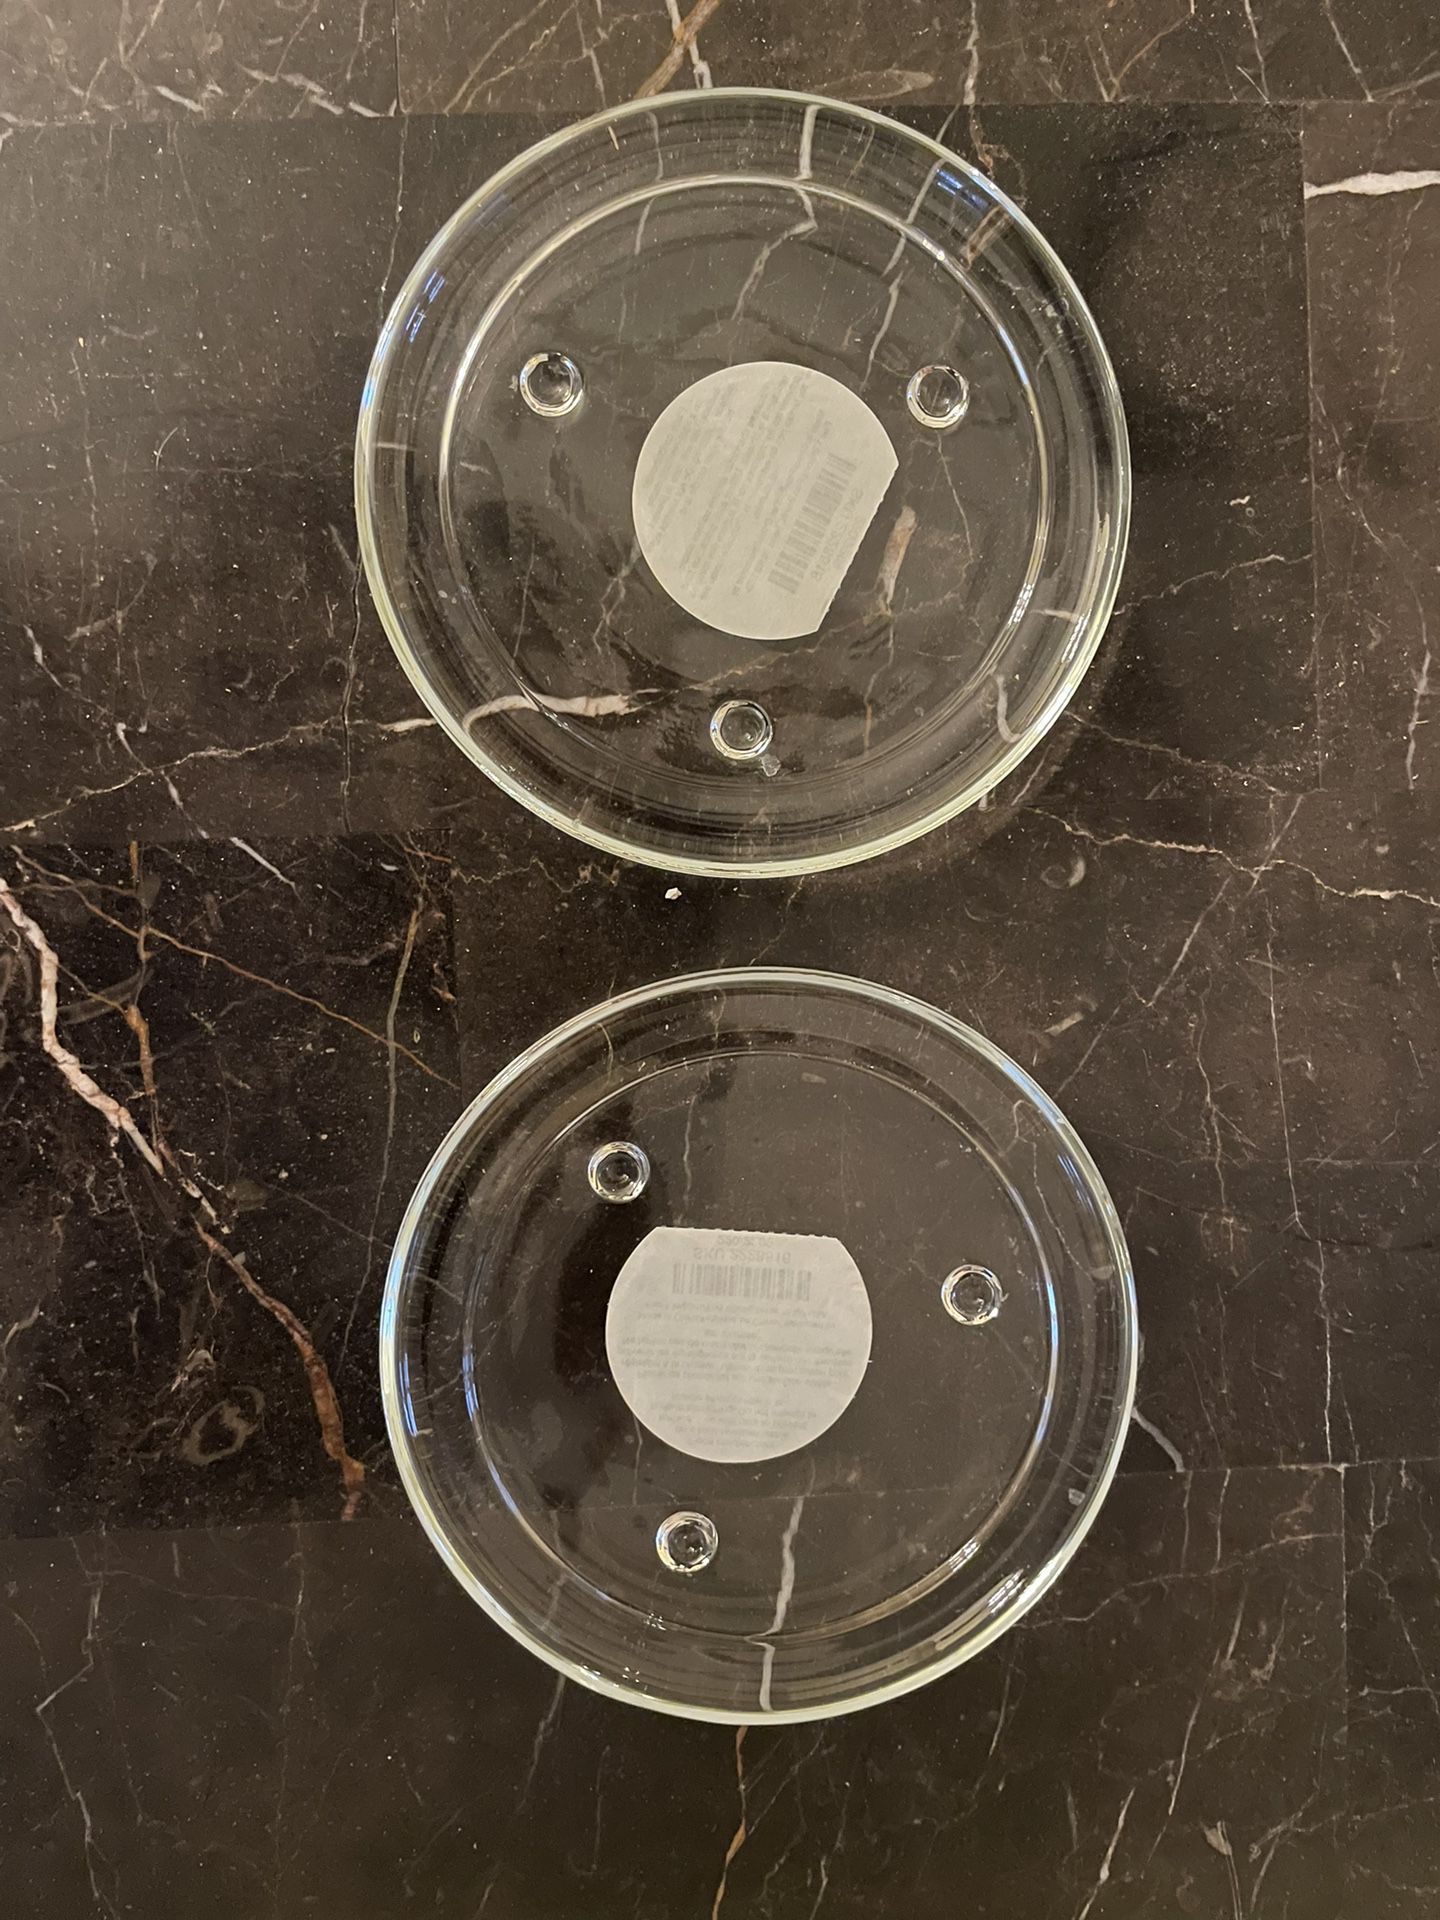 2 New Clear Glass Candle Holder Plates For 3inch Pillar Candles